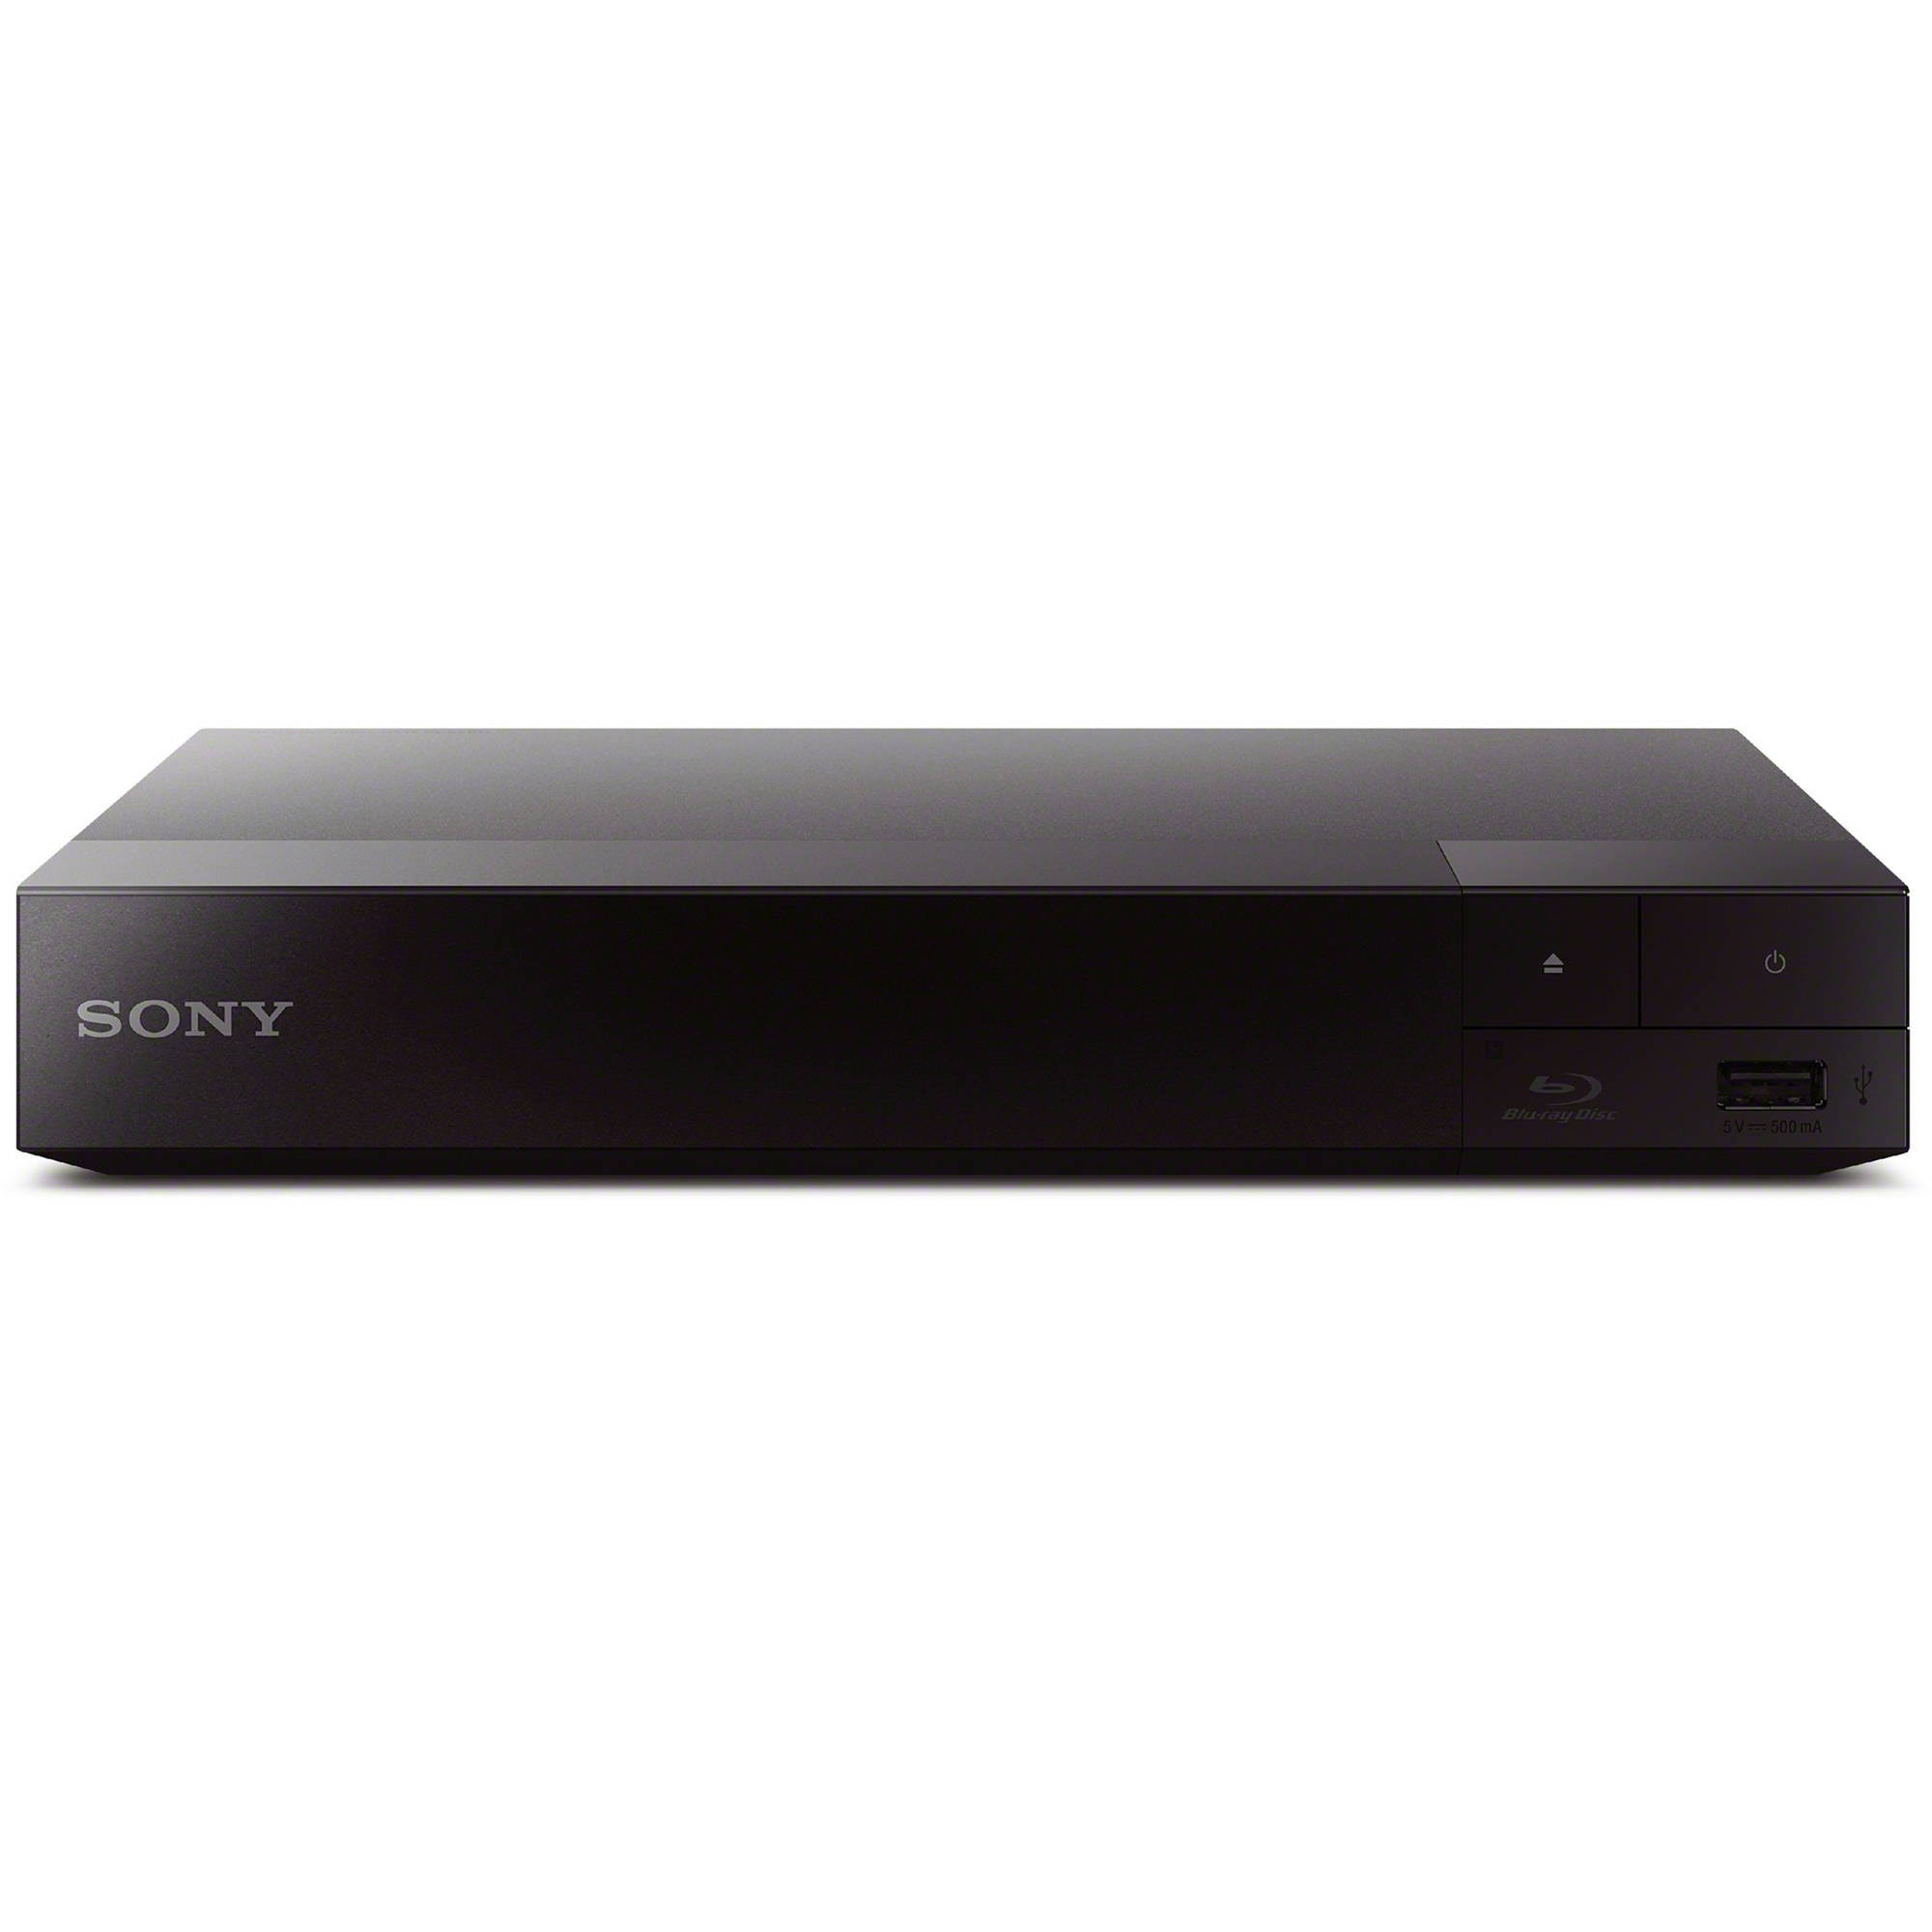 Sony Wired Streaming Bluray Disc Player - Black